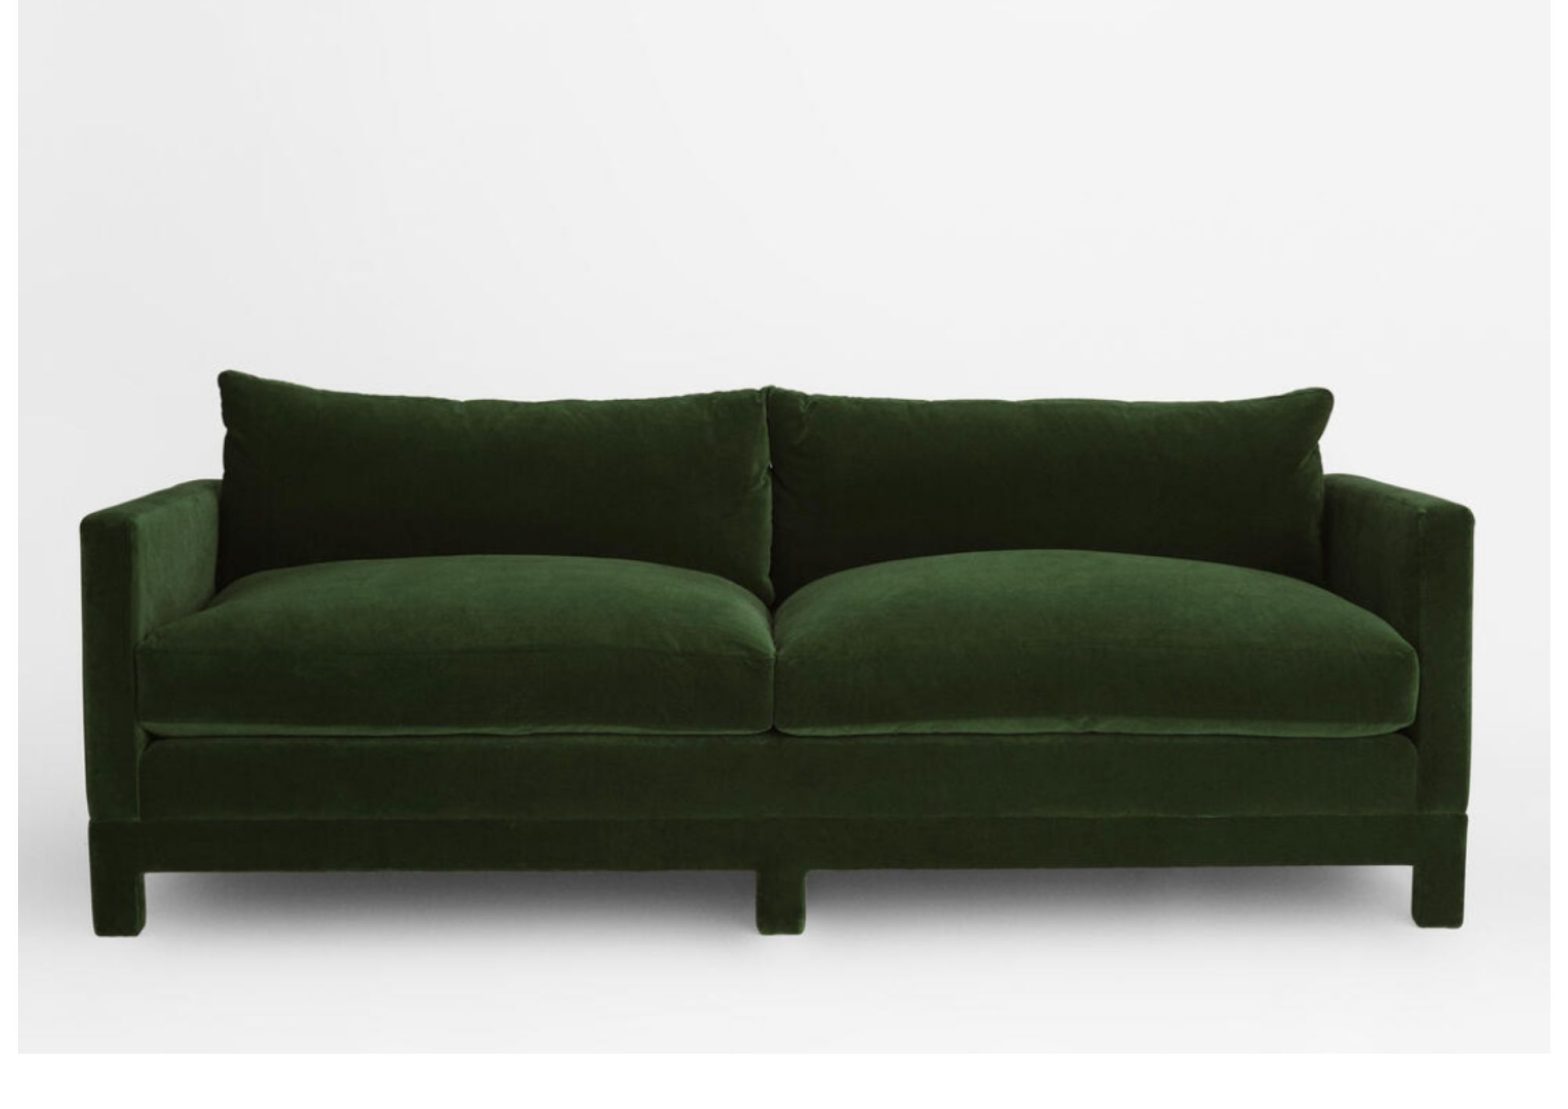 Contemporary style 3 seater sofa in forest green velvet by SOHO HOME